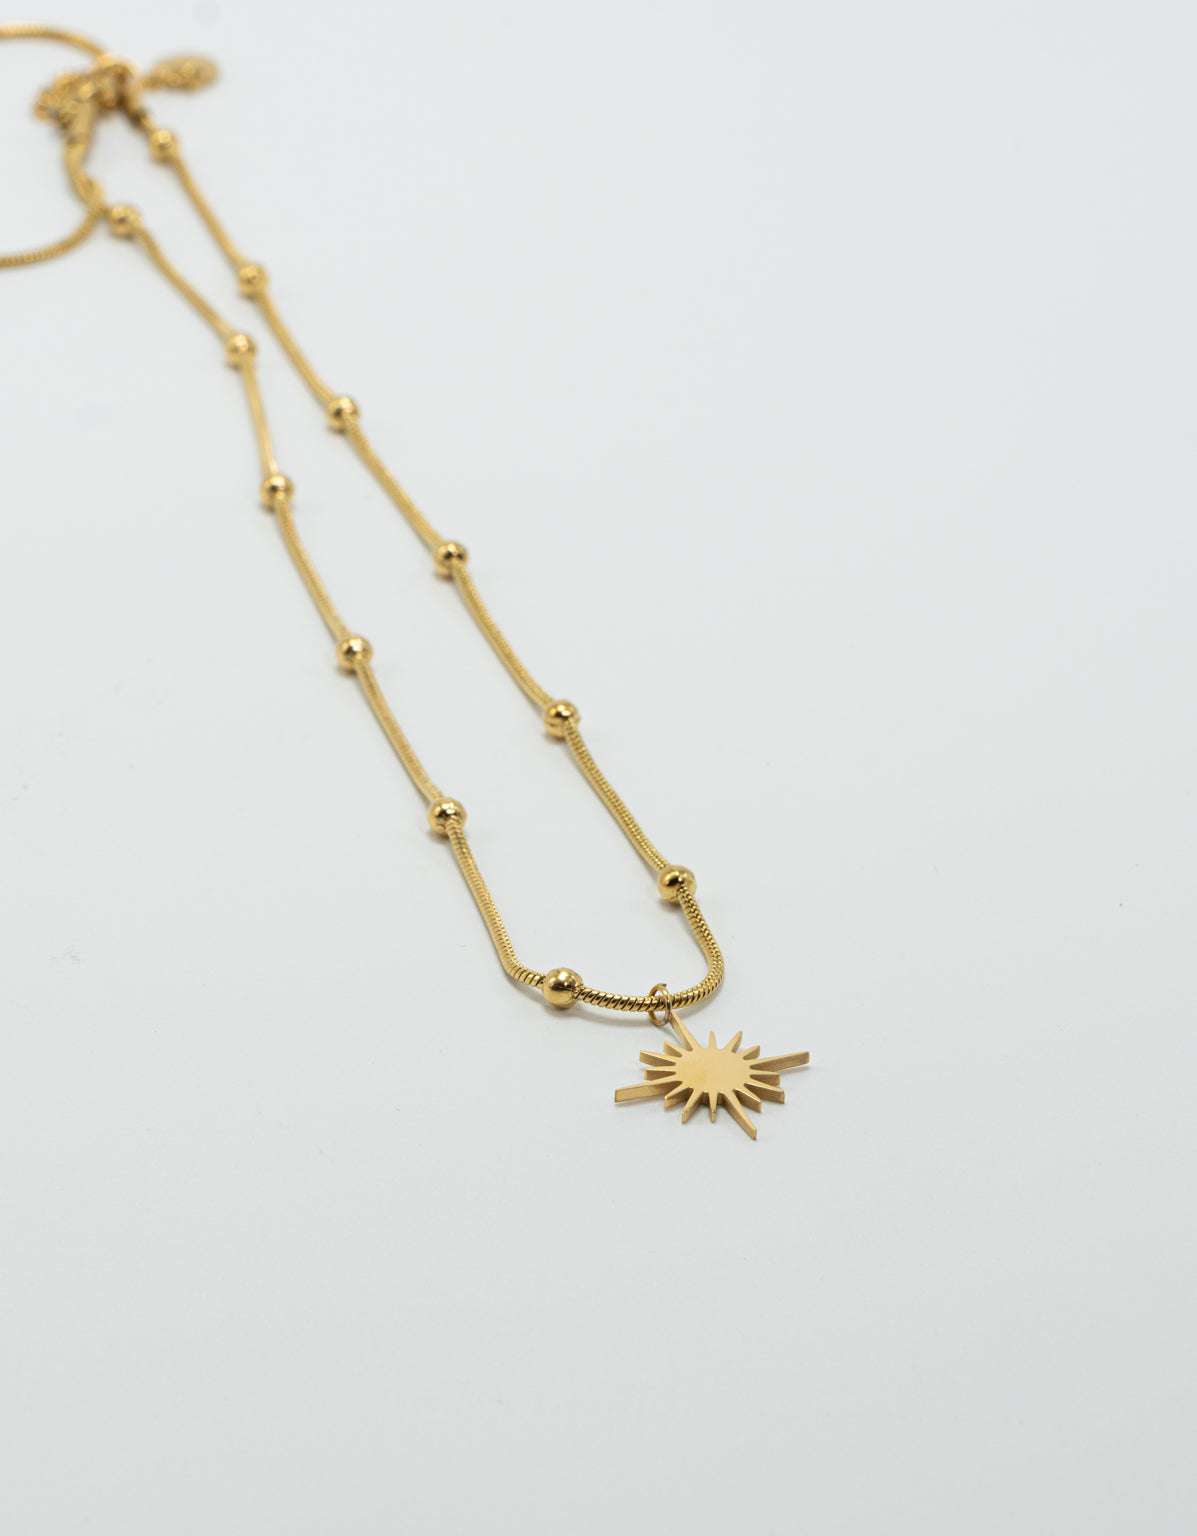 Gold Star Round Necklace, Statement Necklace, Jewelry For Gift,